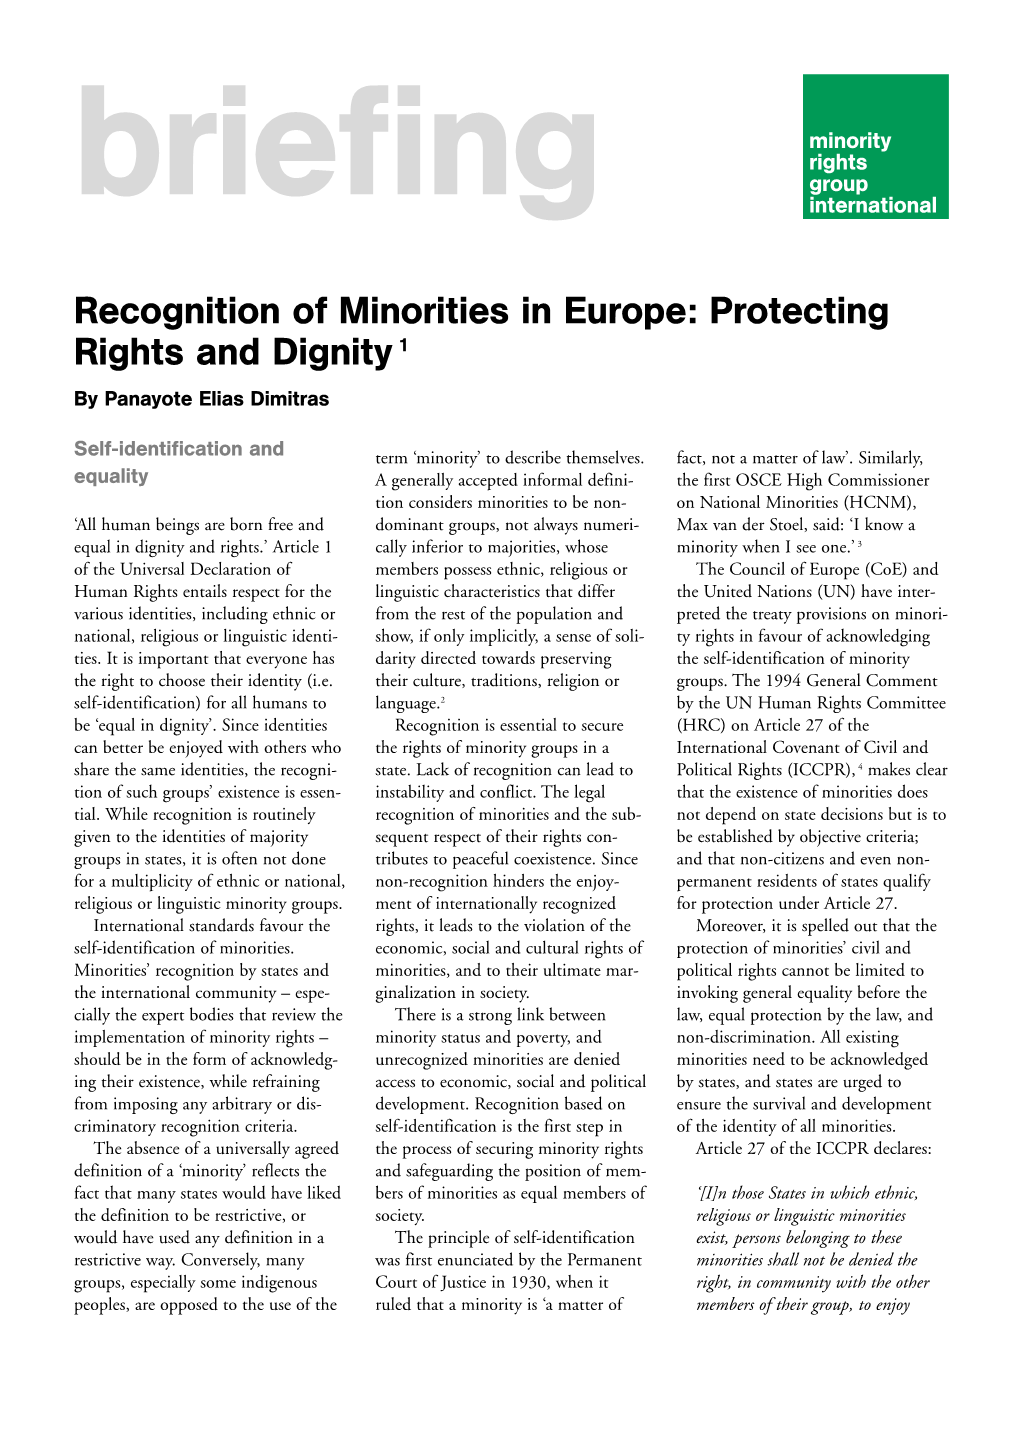 Recognition of Minorities in Europe: Protecting Rights and Dignity 1 by Panayote Elias Dimitras